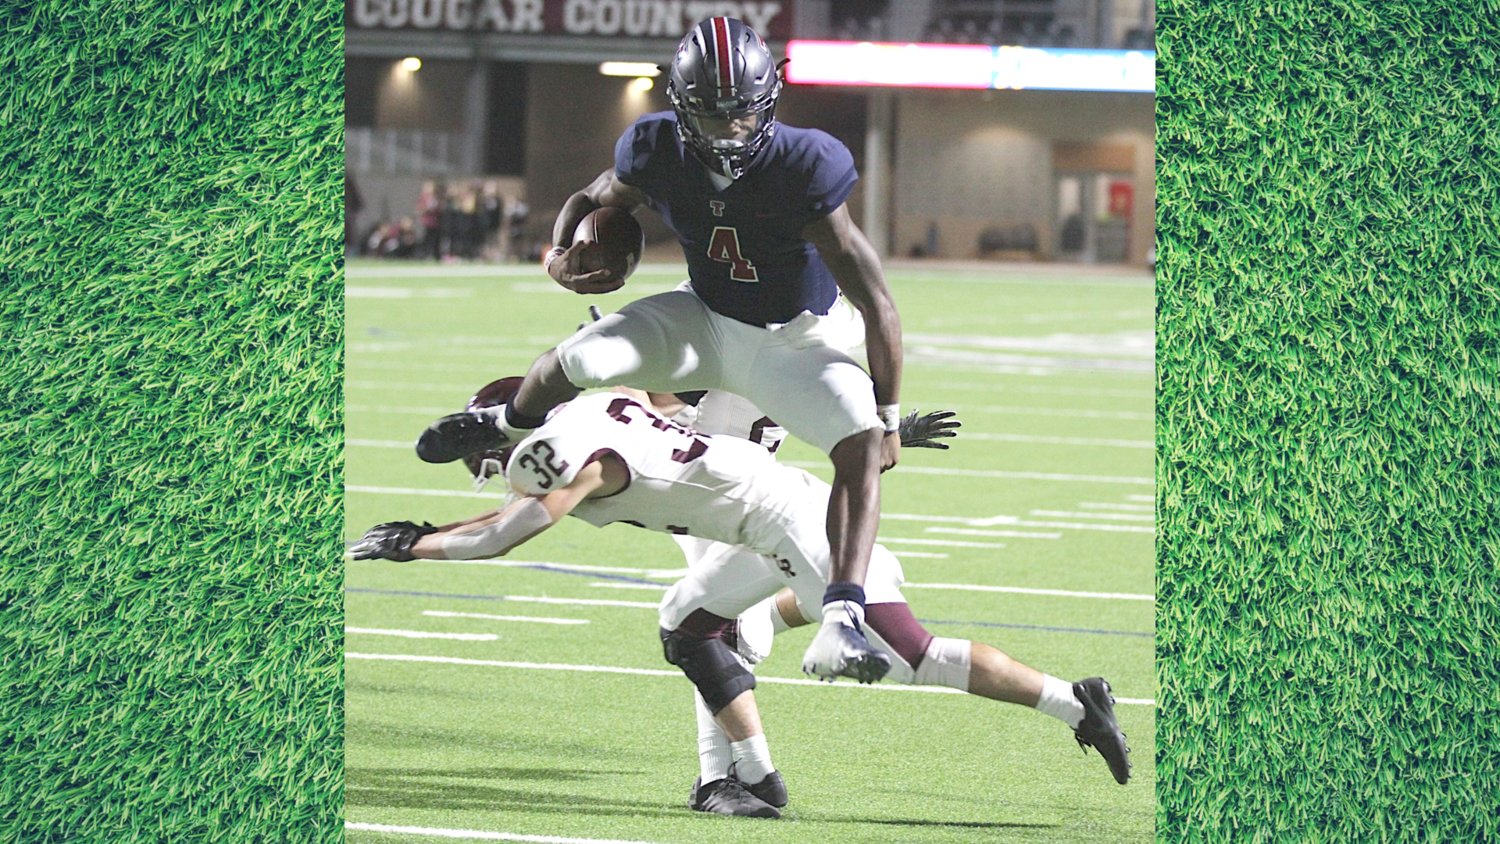 Tompkins quarterback Jalen Milroe recently announced a switch in his college decision and said after much thought with his family, the University of Alabama was the right next step for him to take after his Falcons’ career closes at the end of this year. Pictured is Milroe hurdling a Cinco Ranch defender en route to the end zone in a 58-0 win to end the regular season.